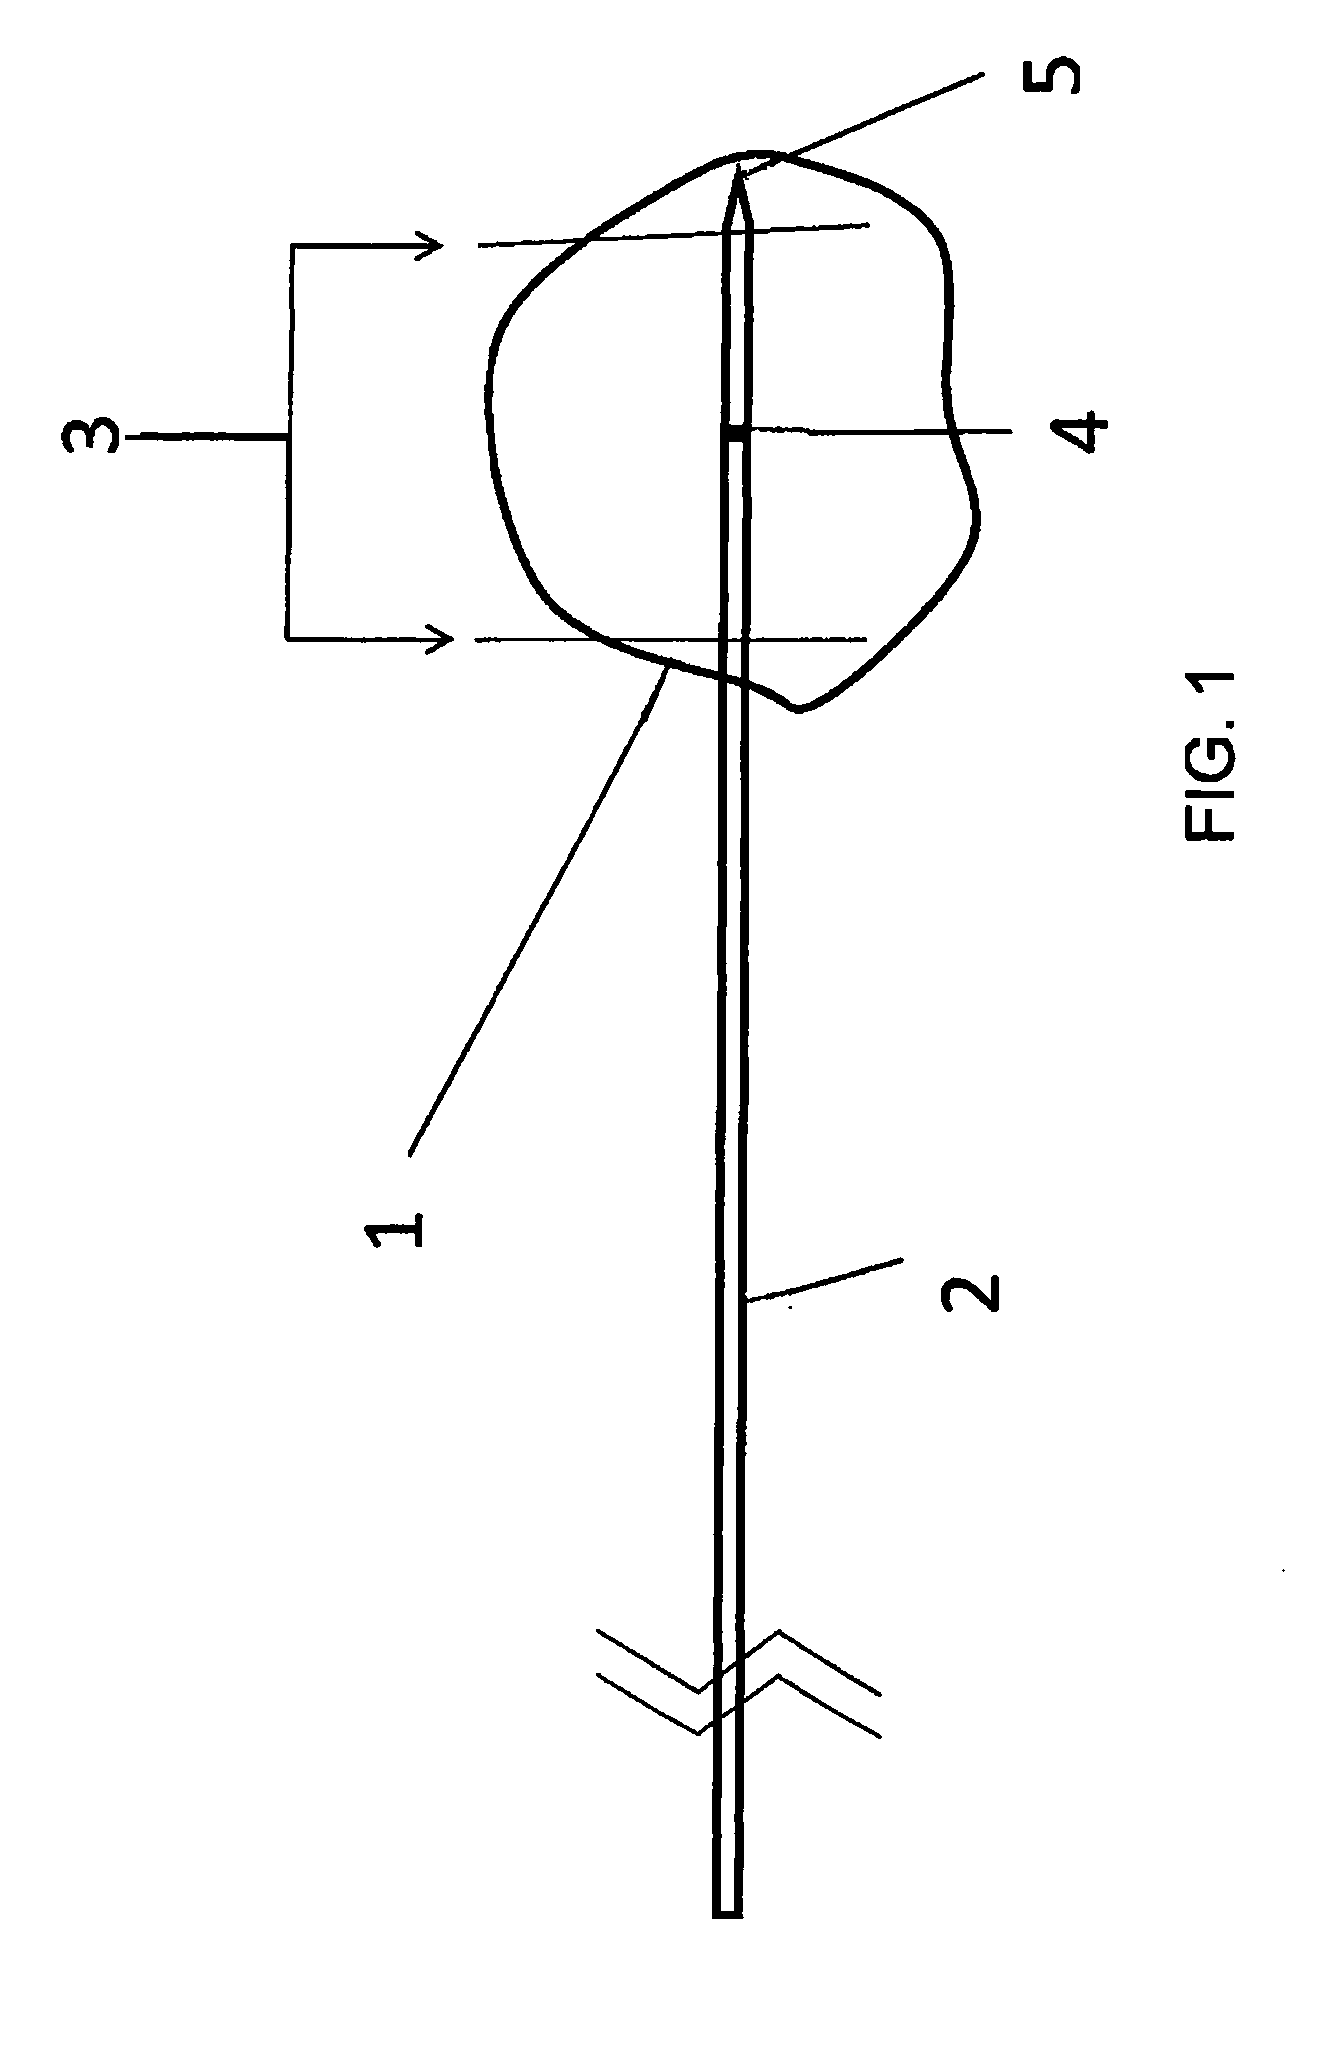 Device and Method for Three-Dimensional Guidance and Three-Dimensional Monitoring of Cryoablation